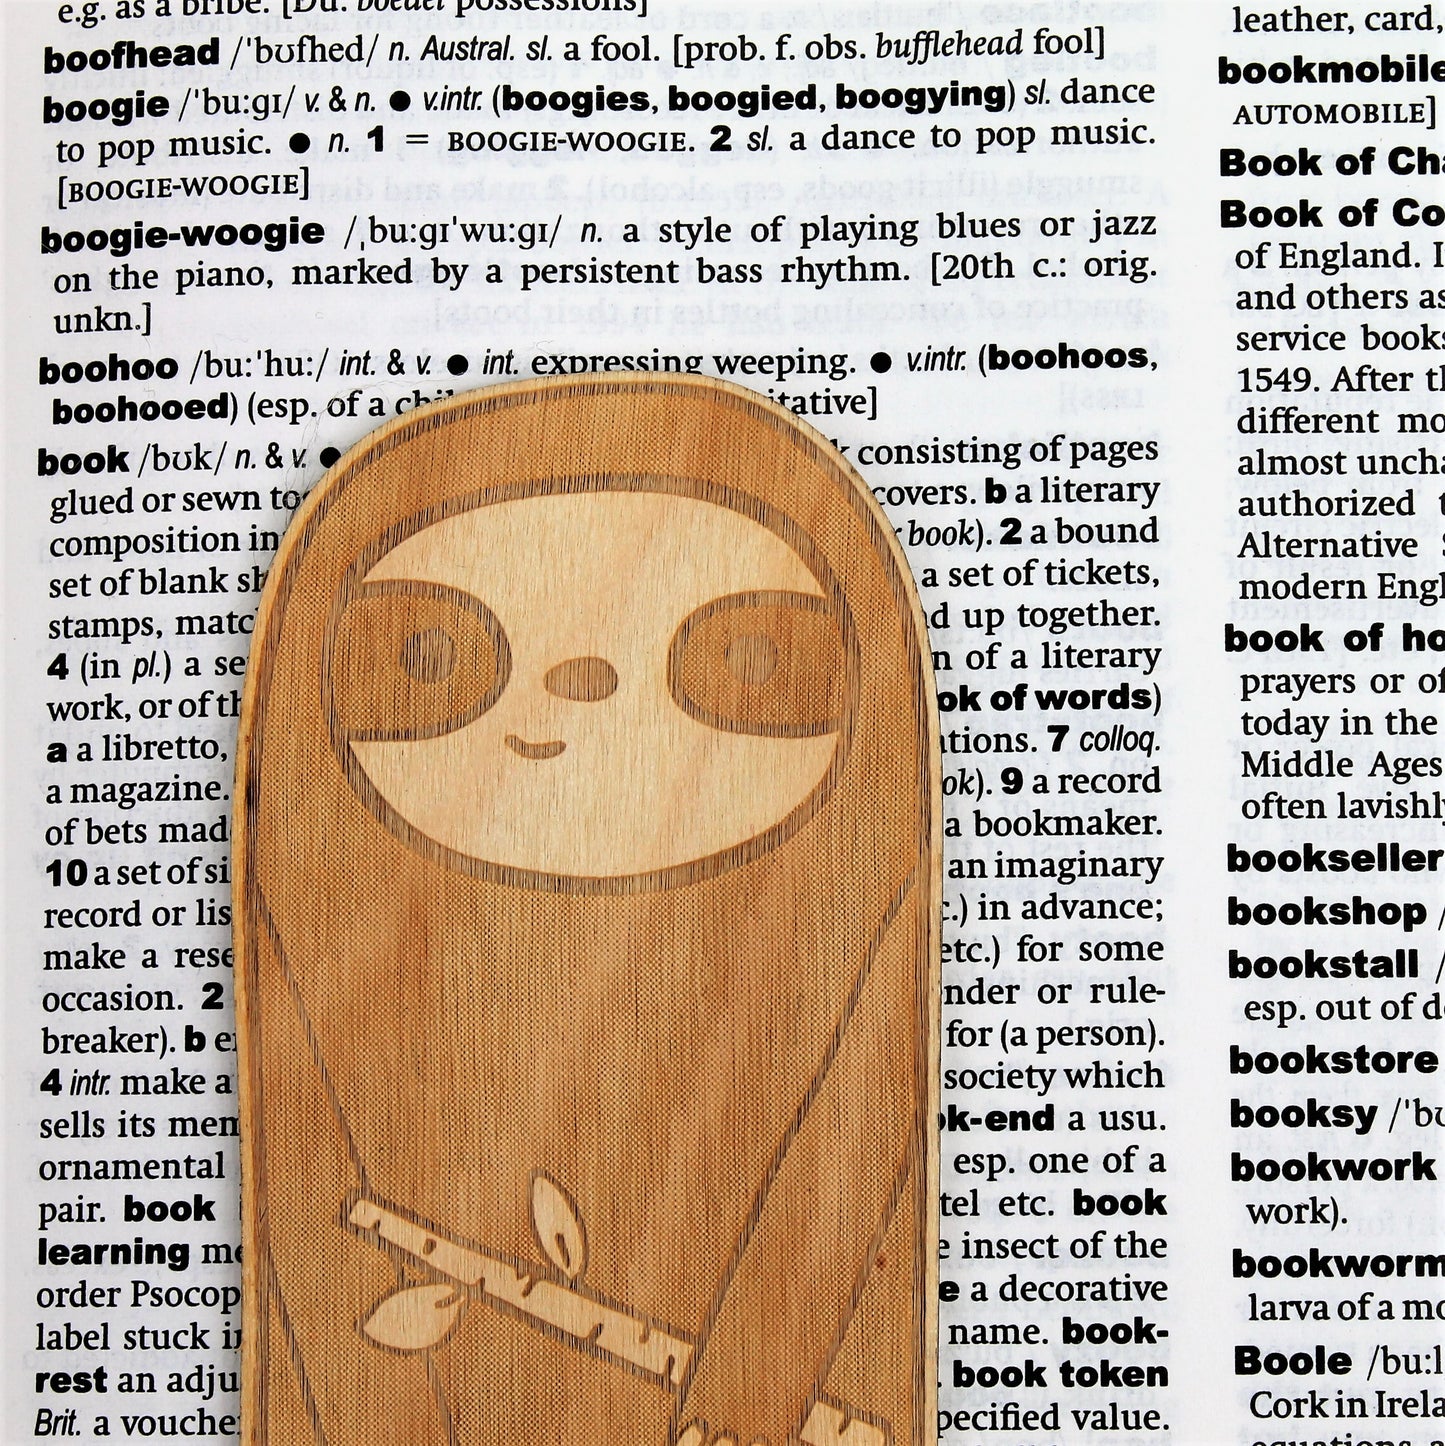 Wooden Sloth Bookmark